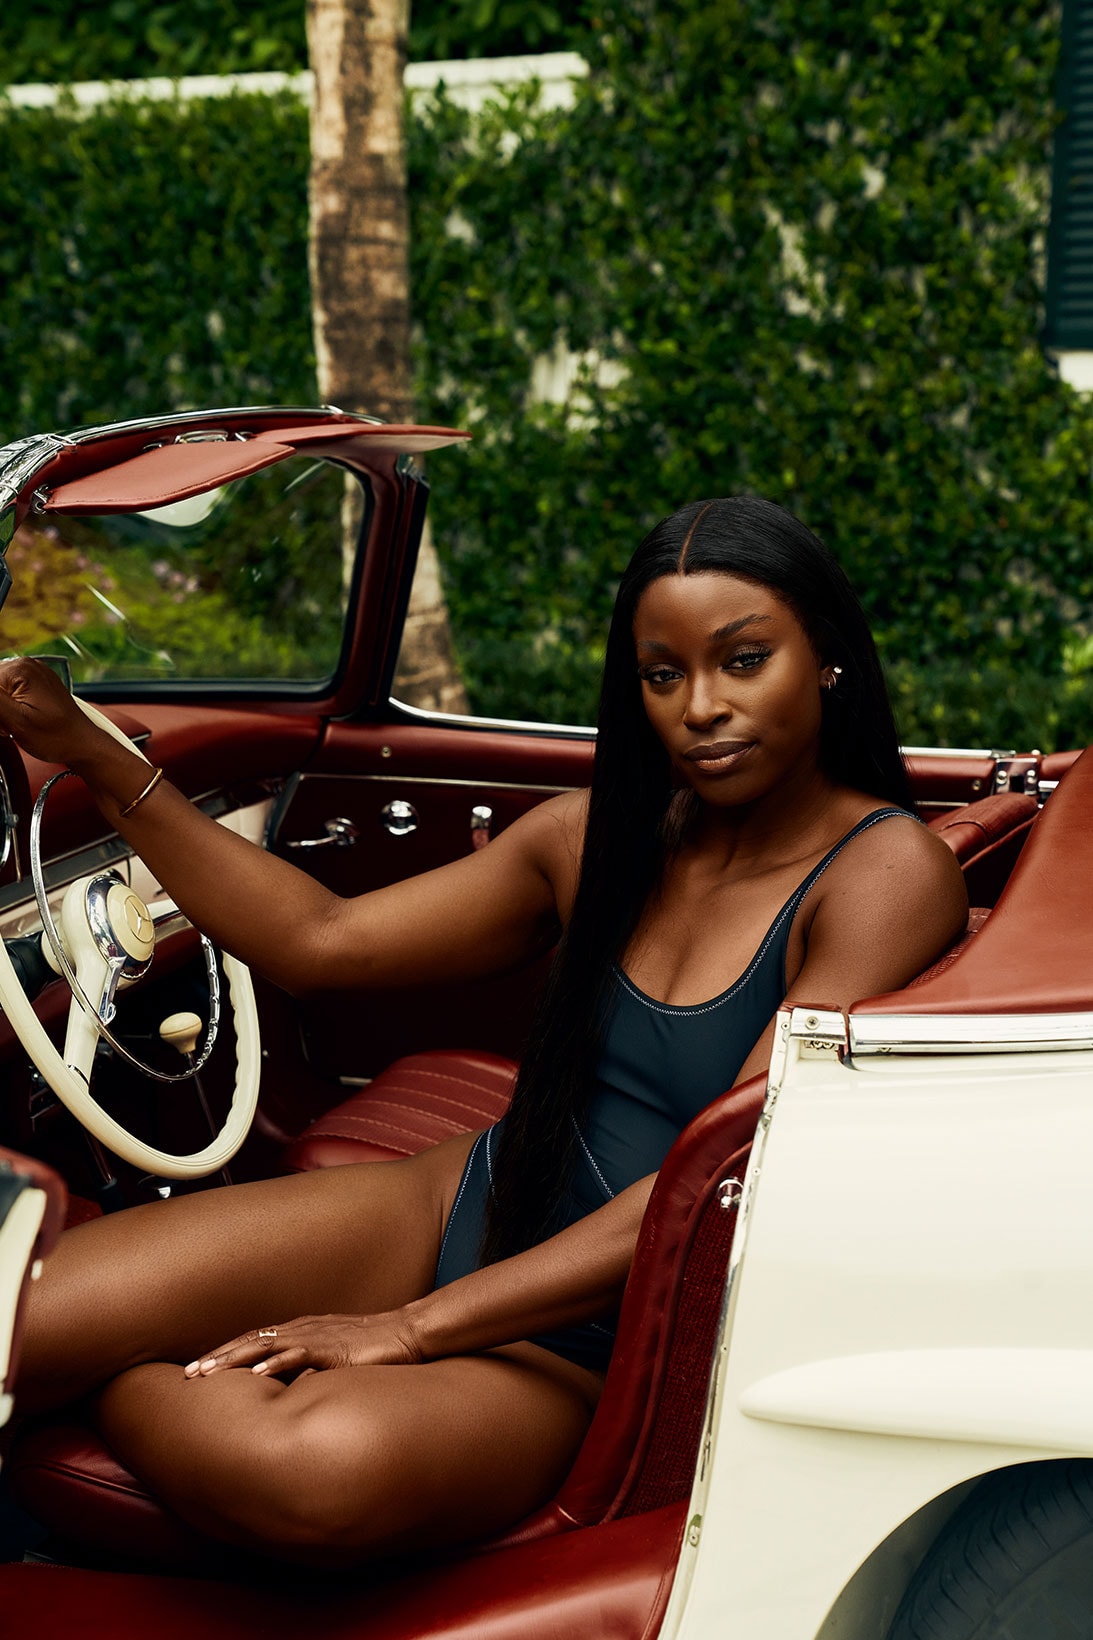 solid and striped sloane stephens tennis player monokini one piece car